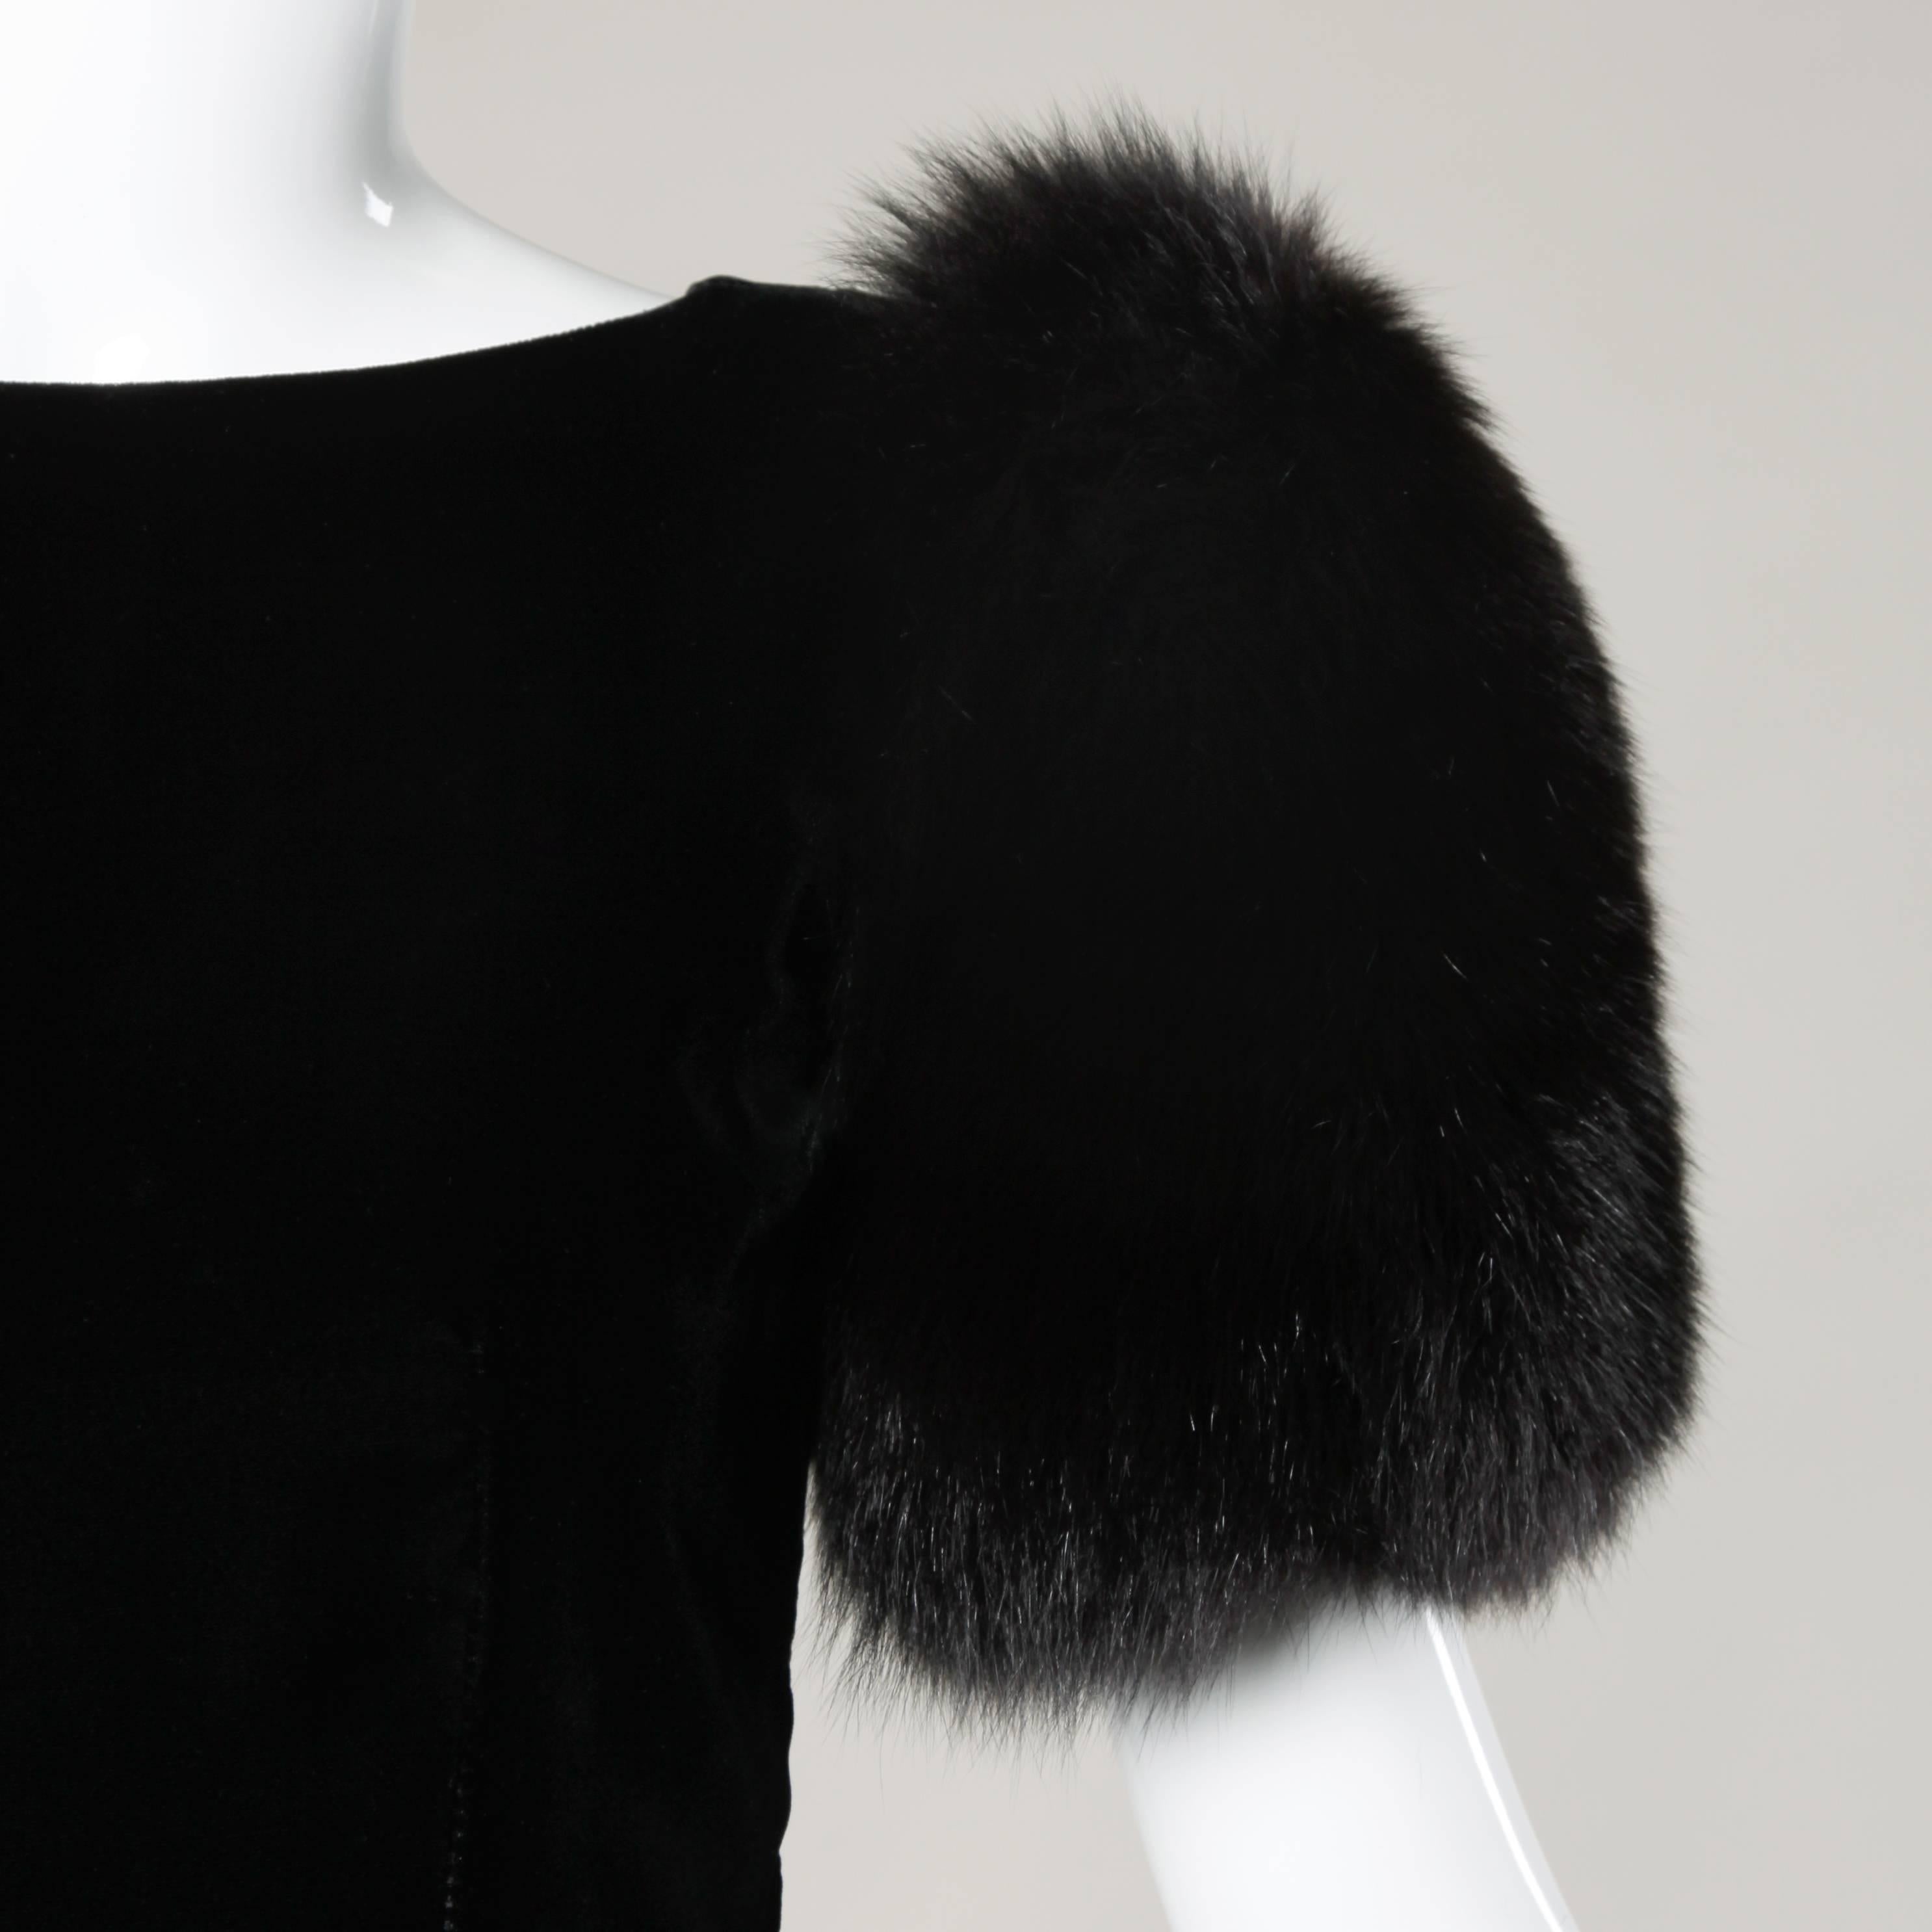 Elegant vintage black velvet sheath dress with giant fox fur sleeves by Victor Costa.

Details:

Fully Lined
Back Zip and Hook Closure
Marked Size: Not Marked
Estimated Size: Small
Color: Black
Fabric: Velvet/ Genuine Fox Fur
Label: Victor